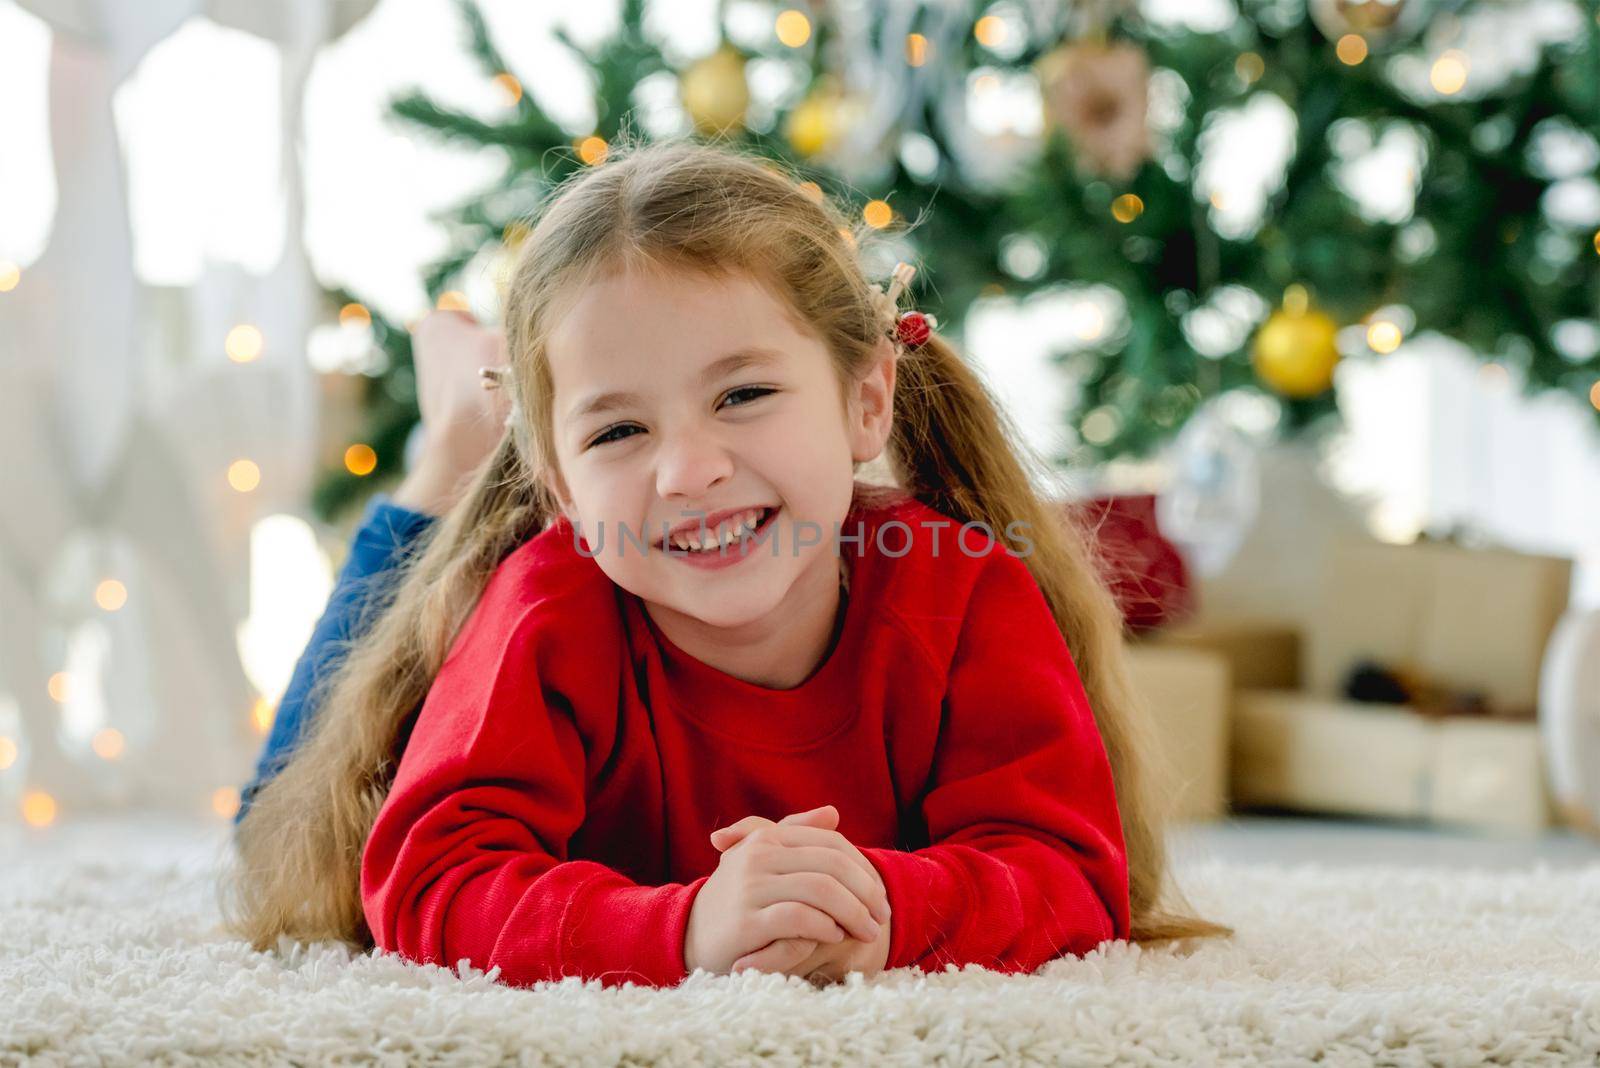 Child girl in Christmas time lying on fluffy carpet and smiling in room with decorated tree and gifts. Pretty kid at home in New Year holidays